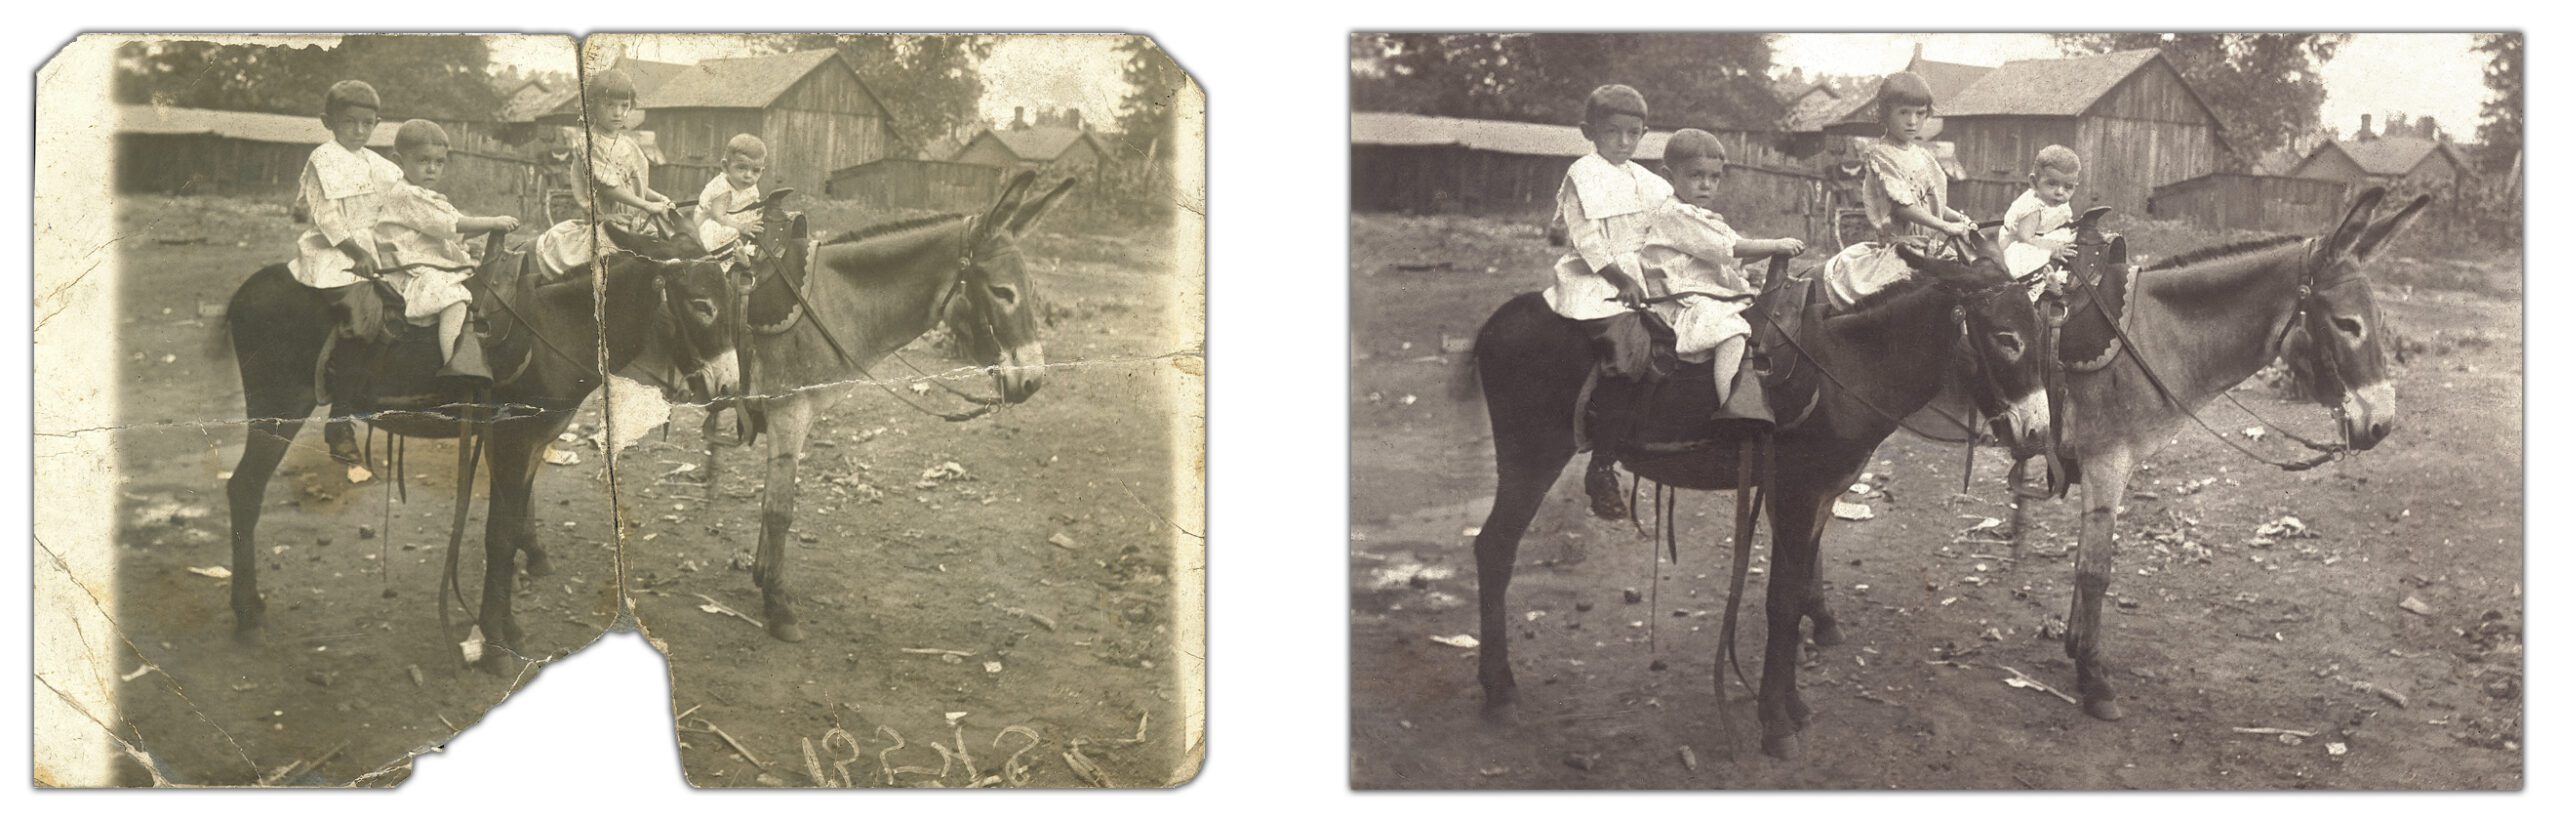 Restored Photograph of Kids on Burros